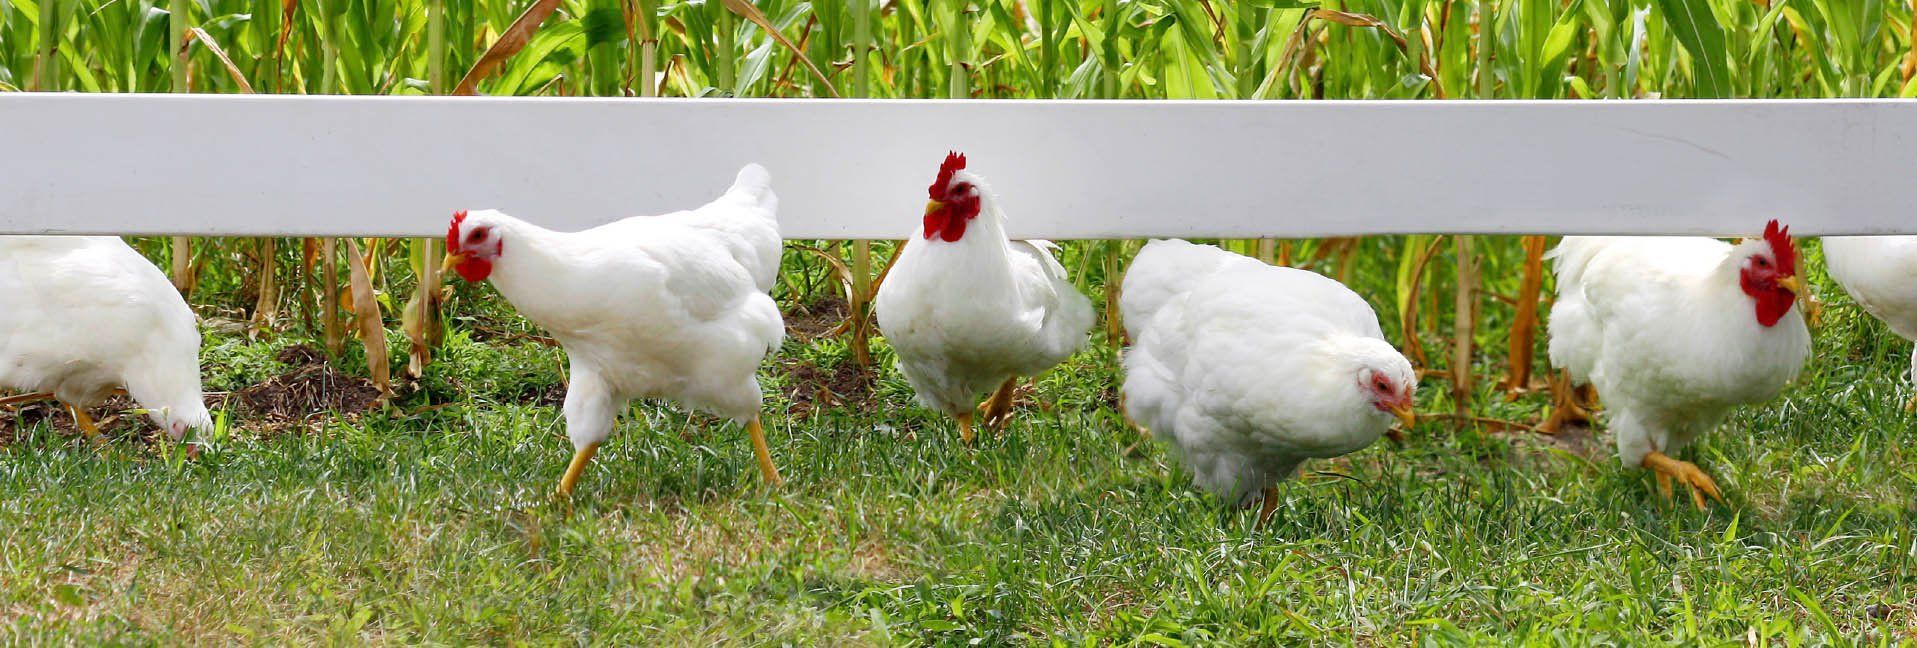 How-to process your own chickens